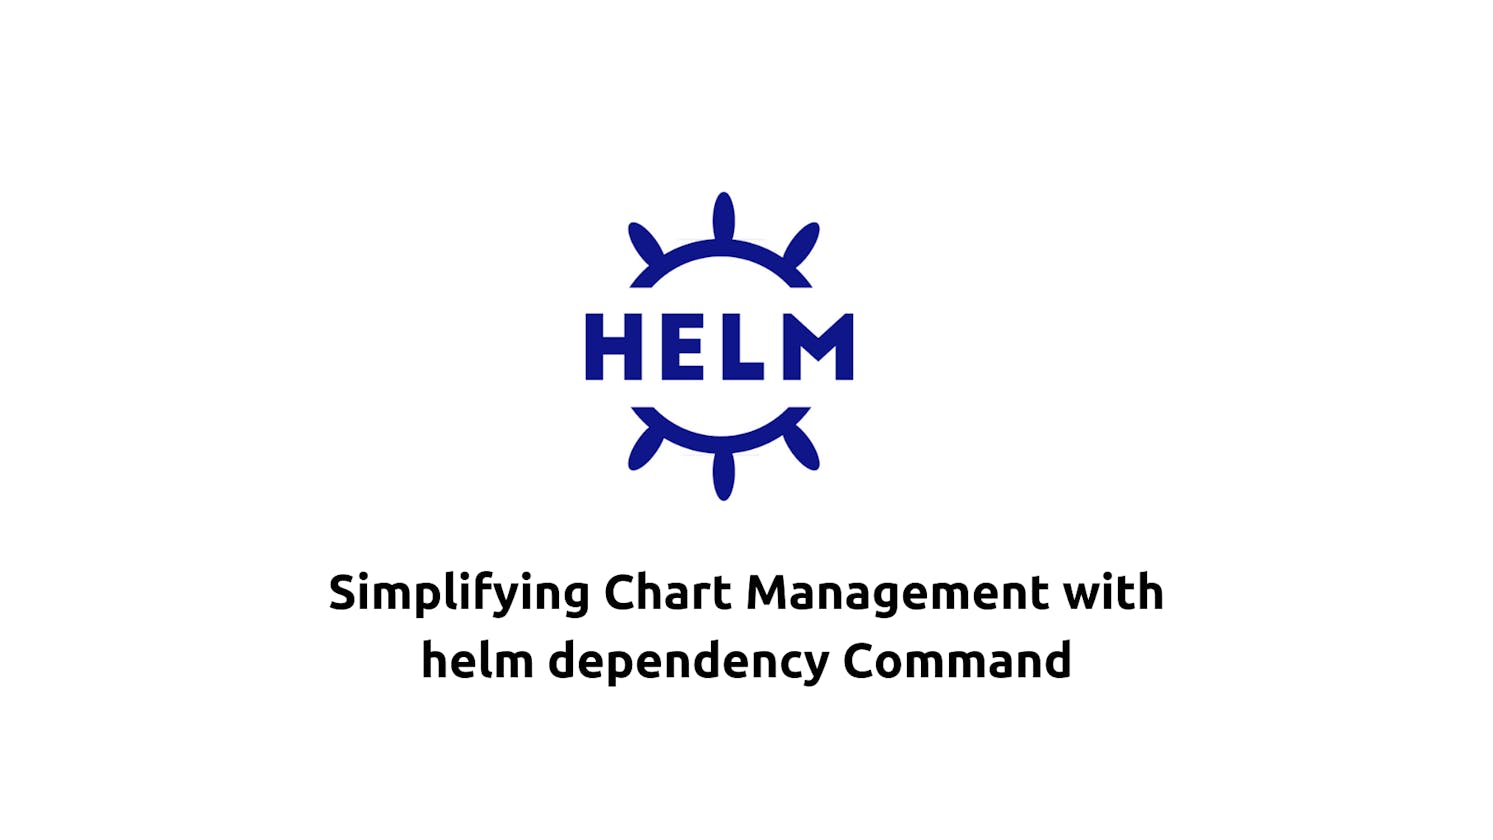 Simplifying Chart Management with helm dependency Command